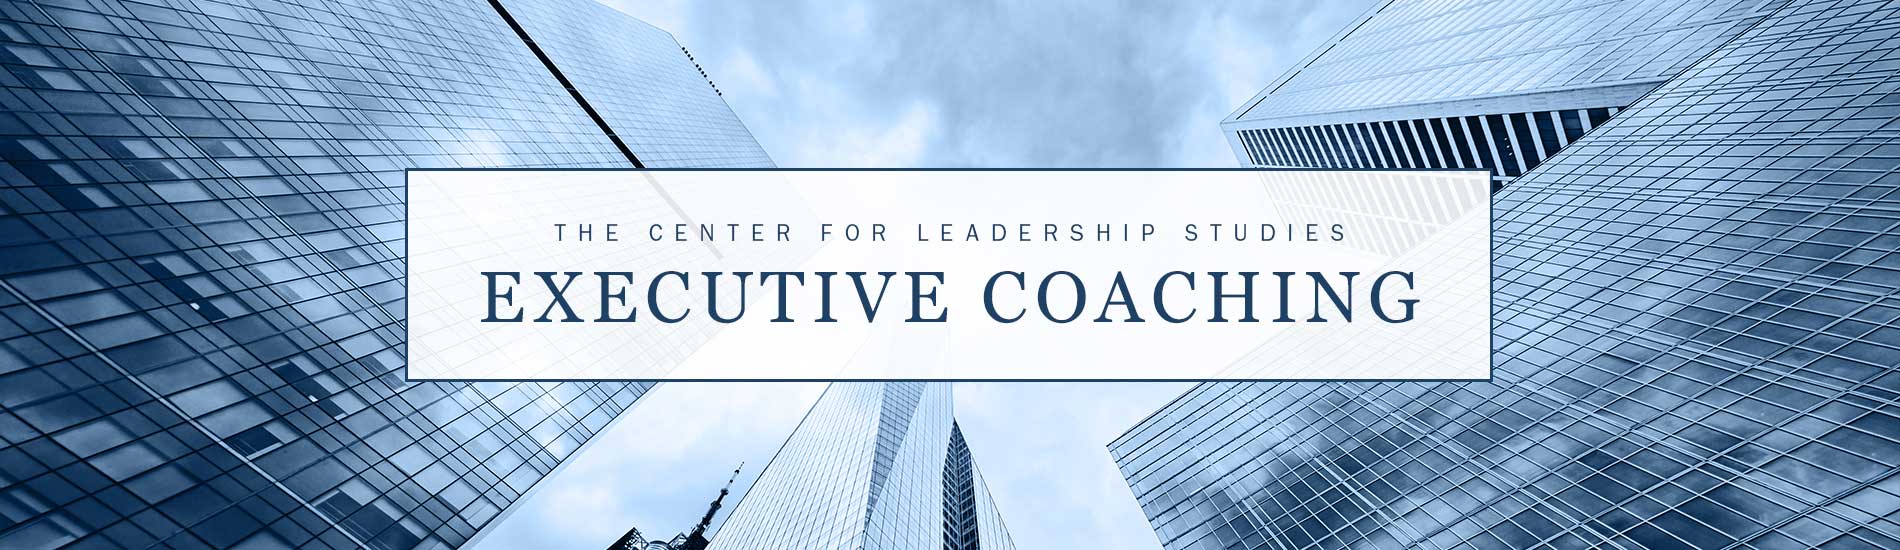 The Center for Leadership Studies Executive Coaching